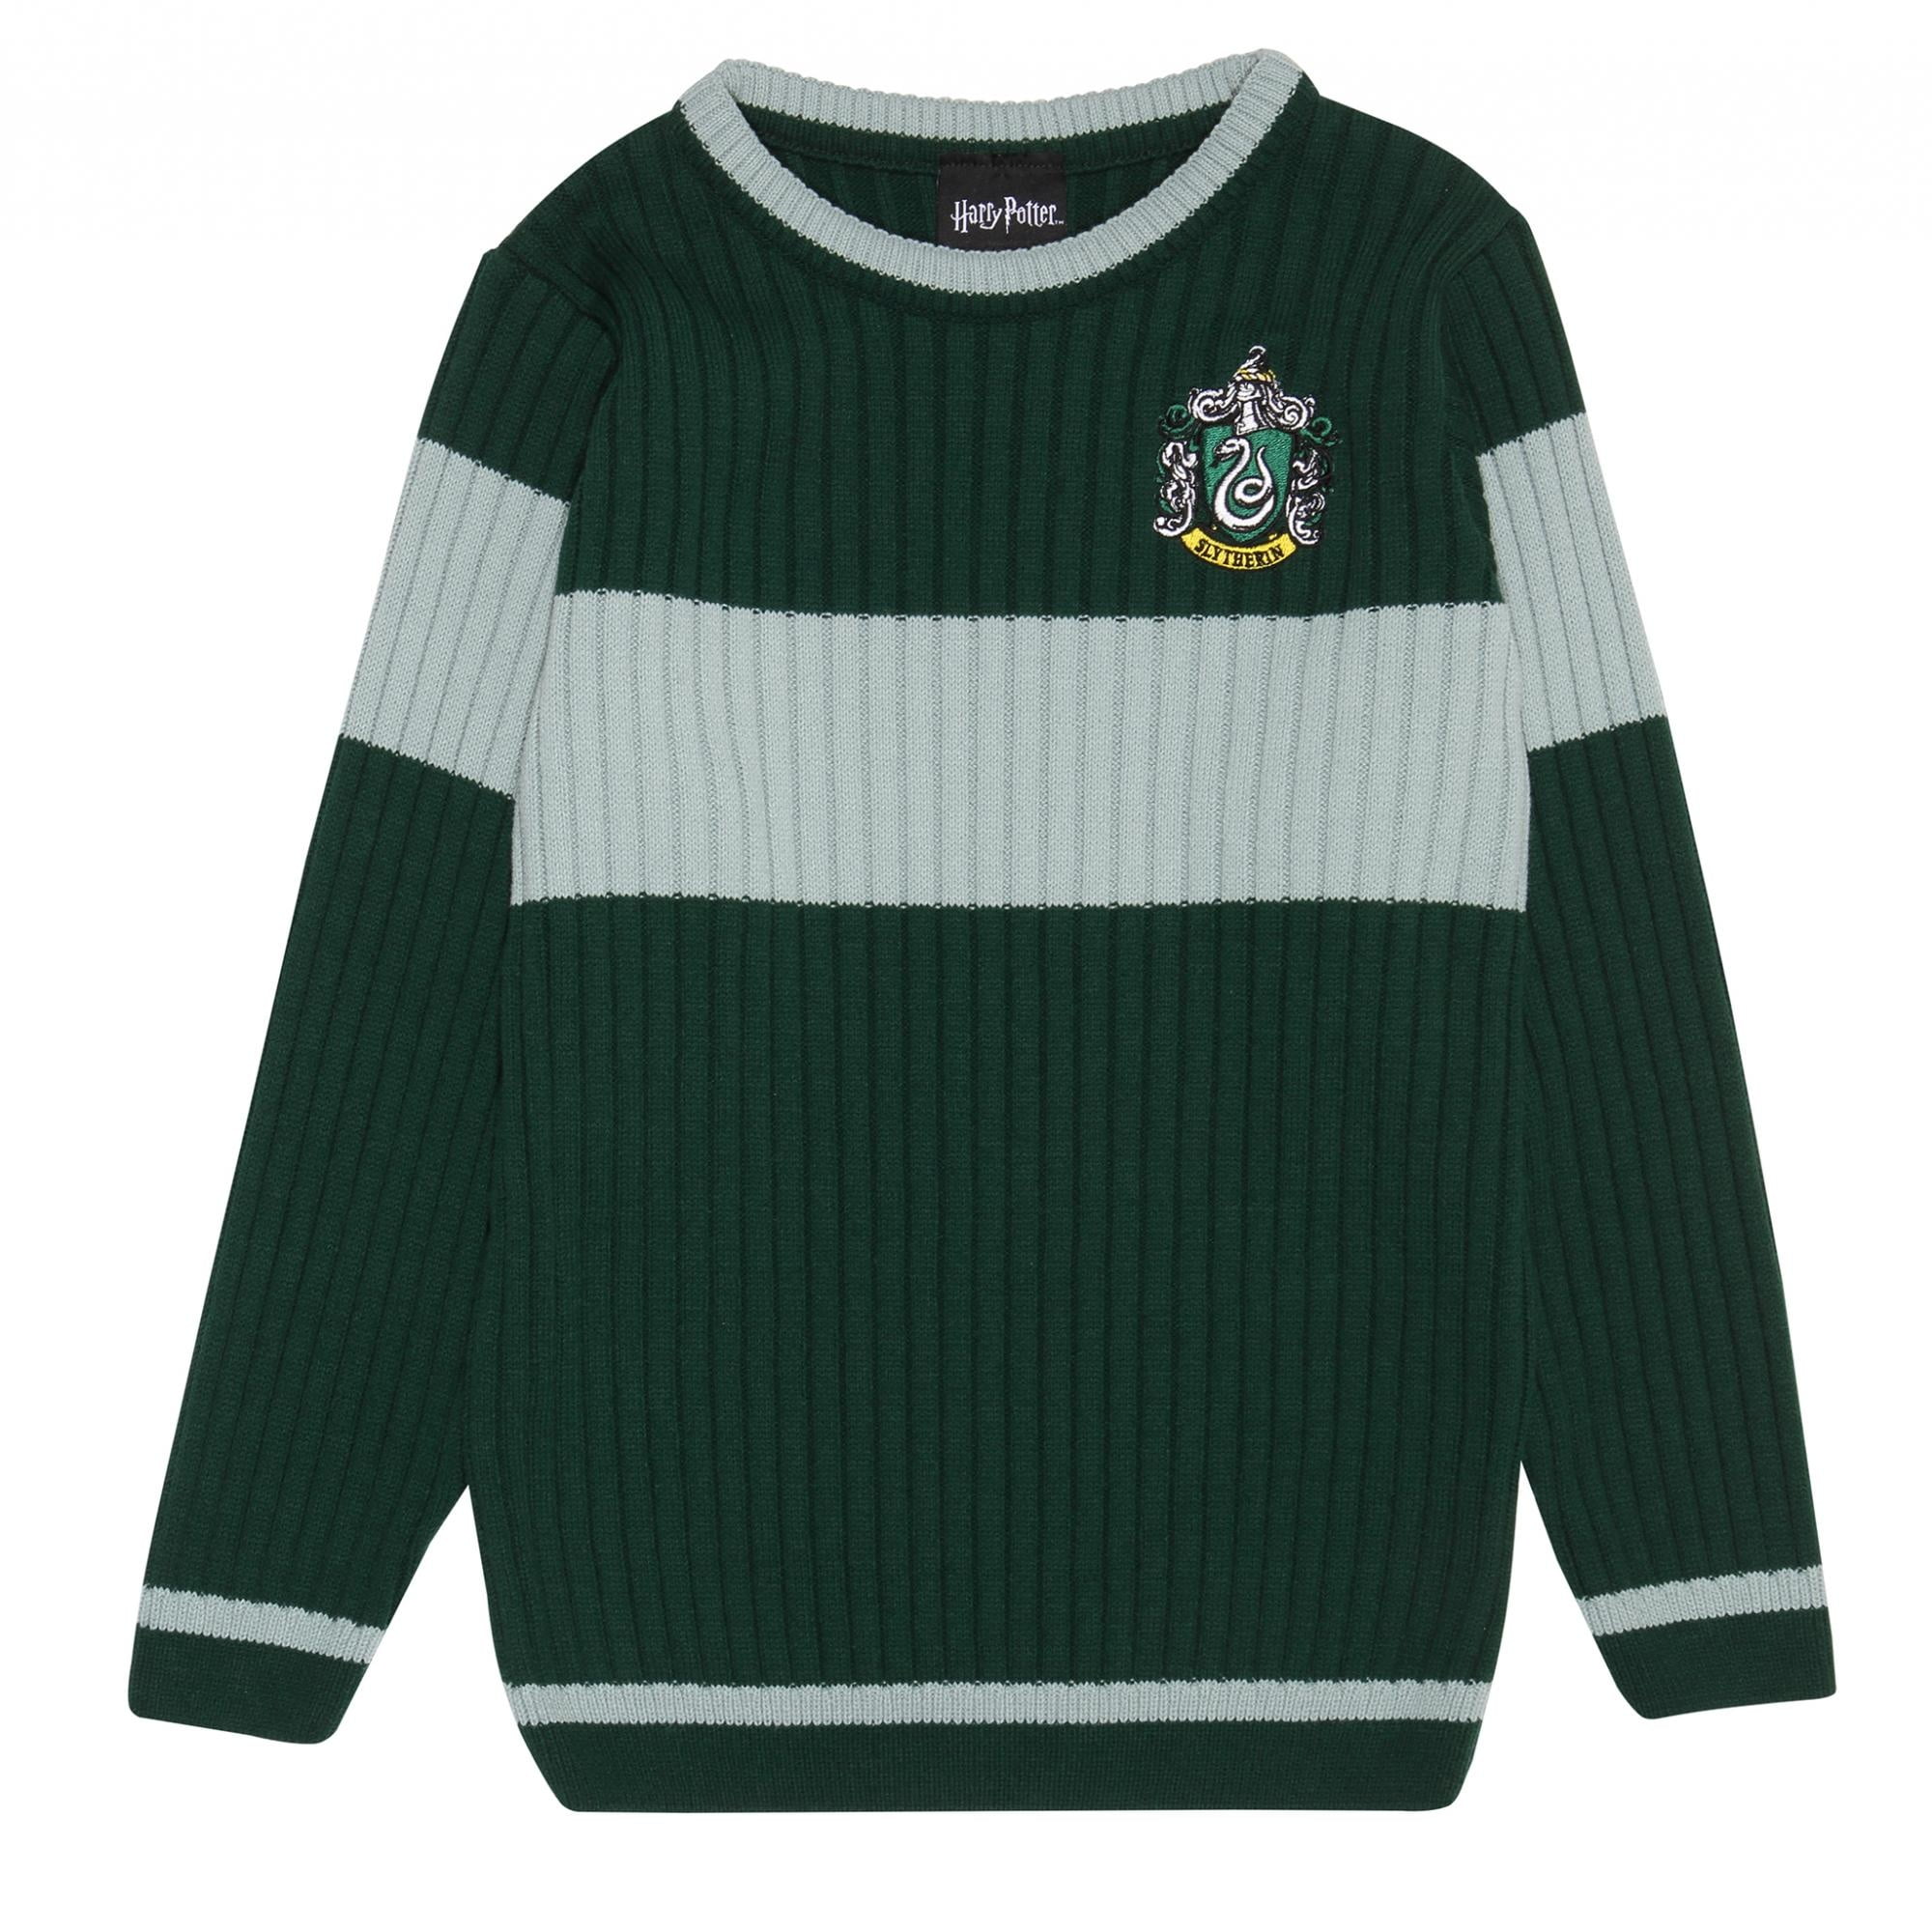 Potter Boys Slytherin Quidditch Knitted Sweater - Walmart.com